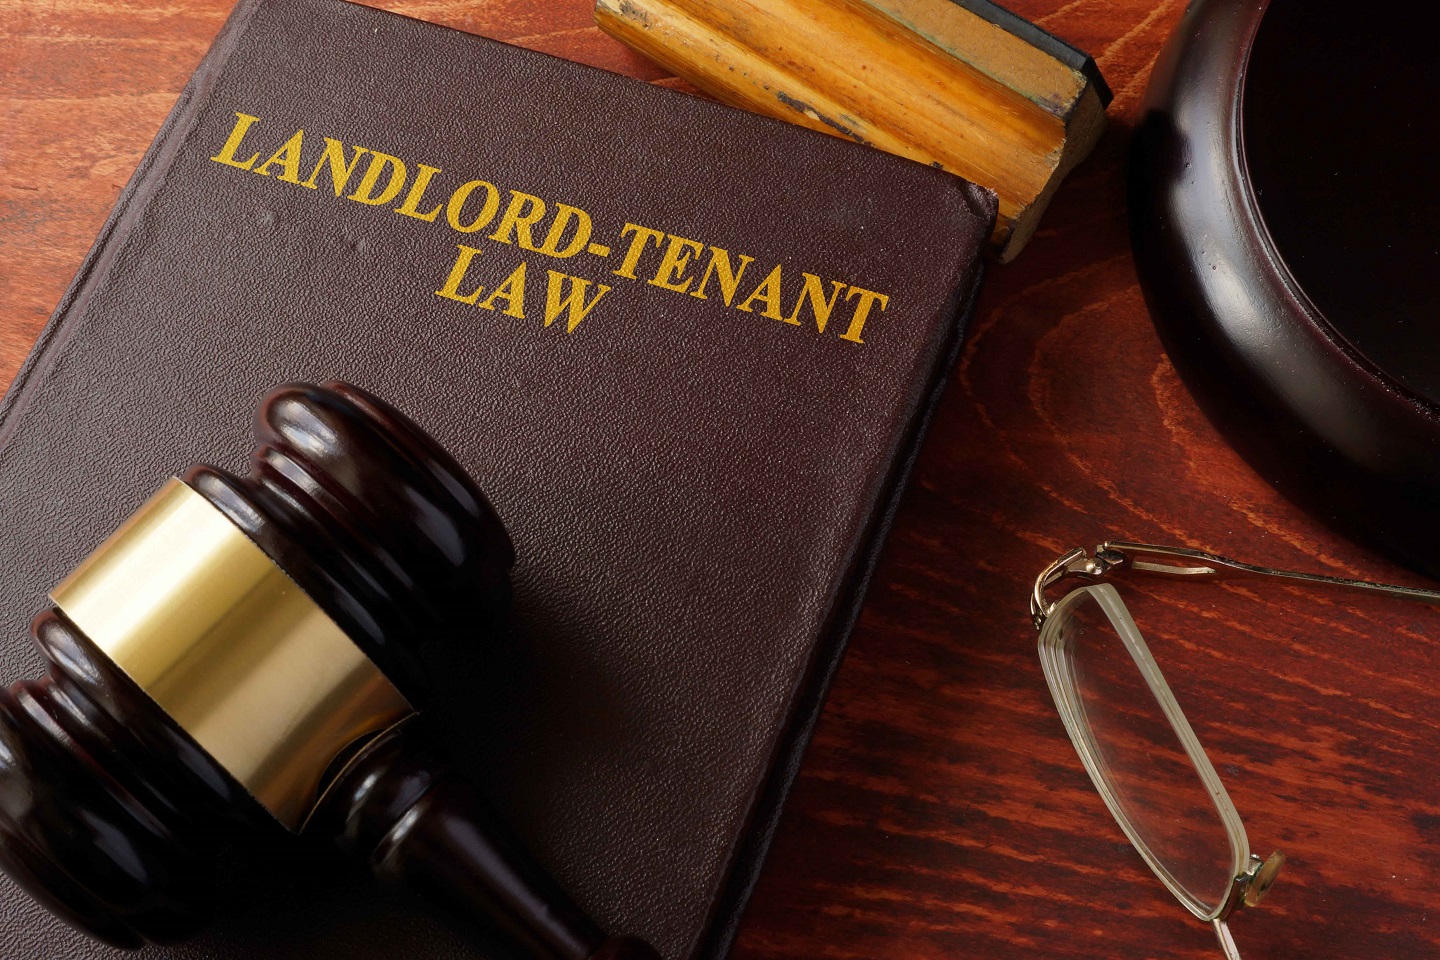 The tenancy law is here to help you against any misconduct regarding property rent